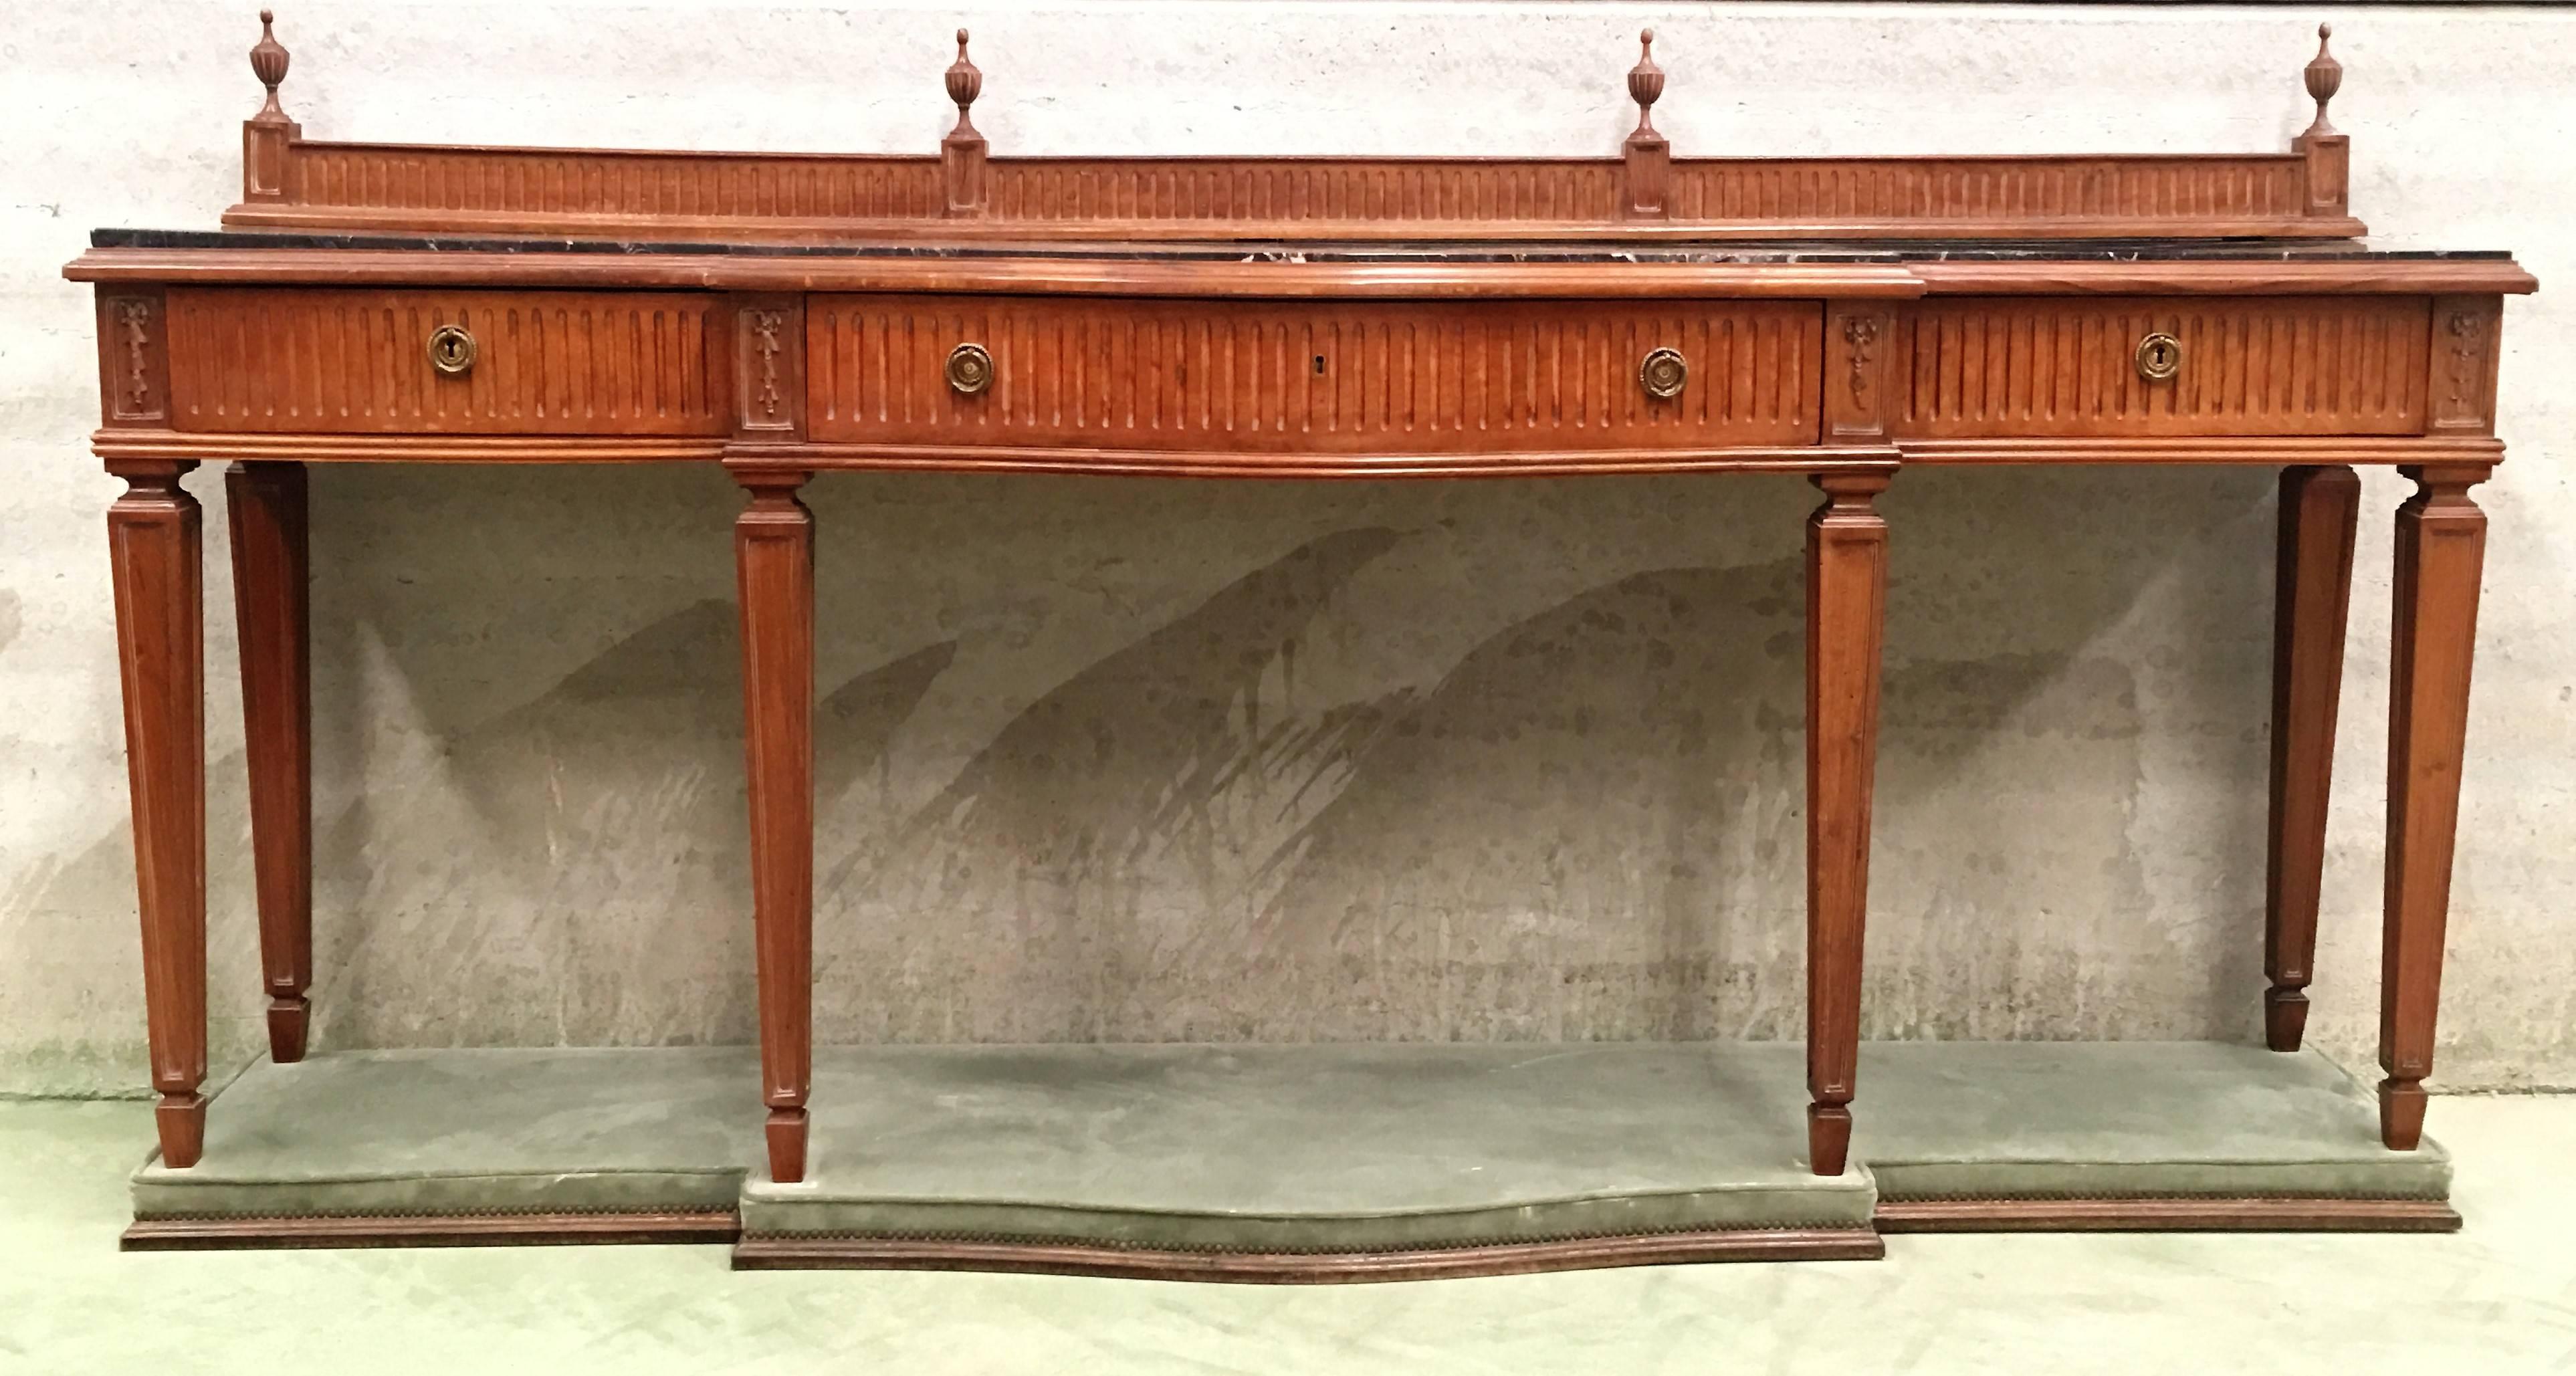 French Louis XVI style free standing console or sofa table with three drawers, fluted legs and a black marble top, circa 1920.
Elegant green velvet base and top with balls

Measure: Total height 45.27in
Height to the marble 36.61in.